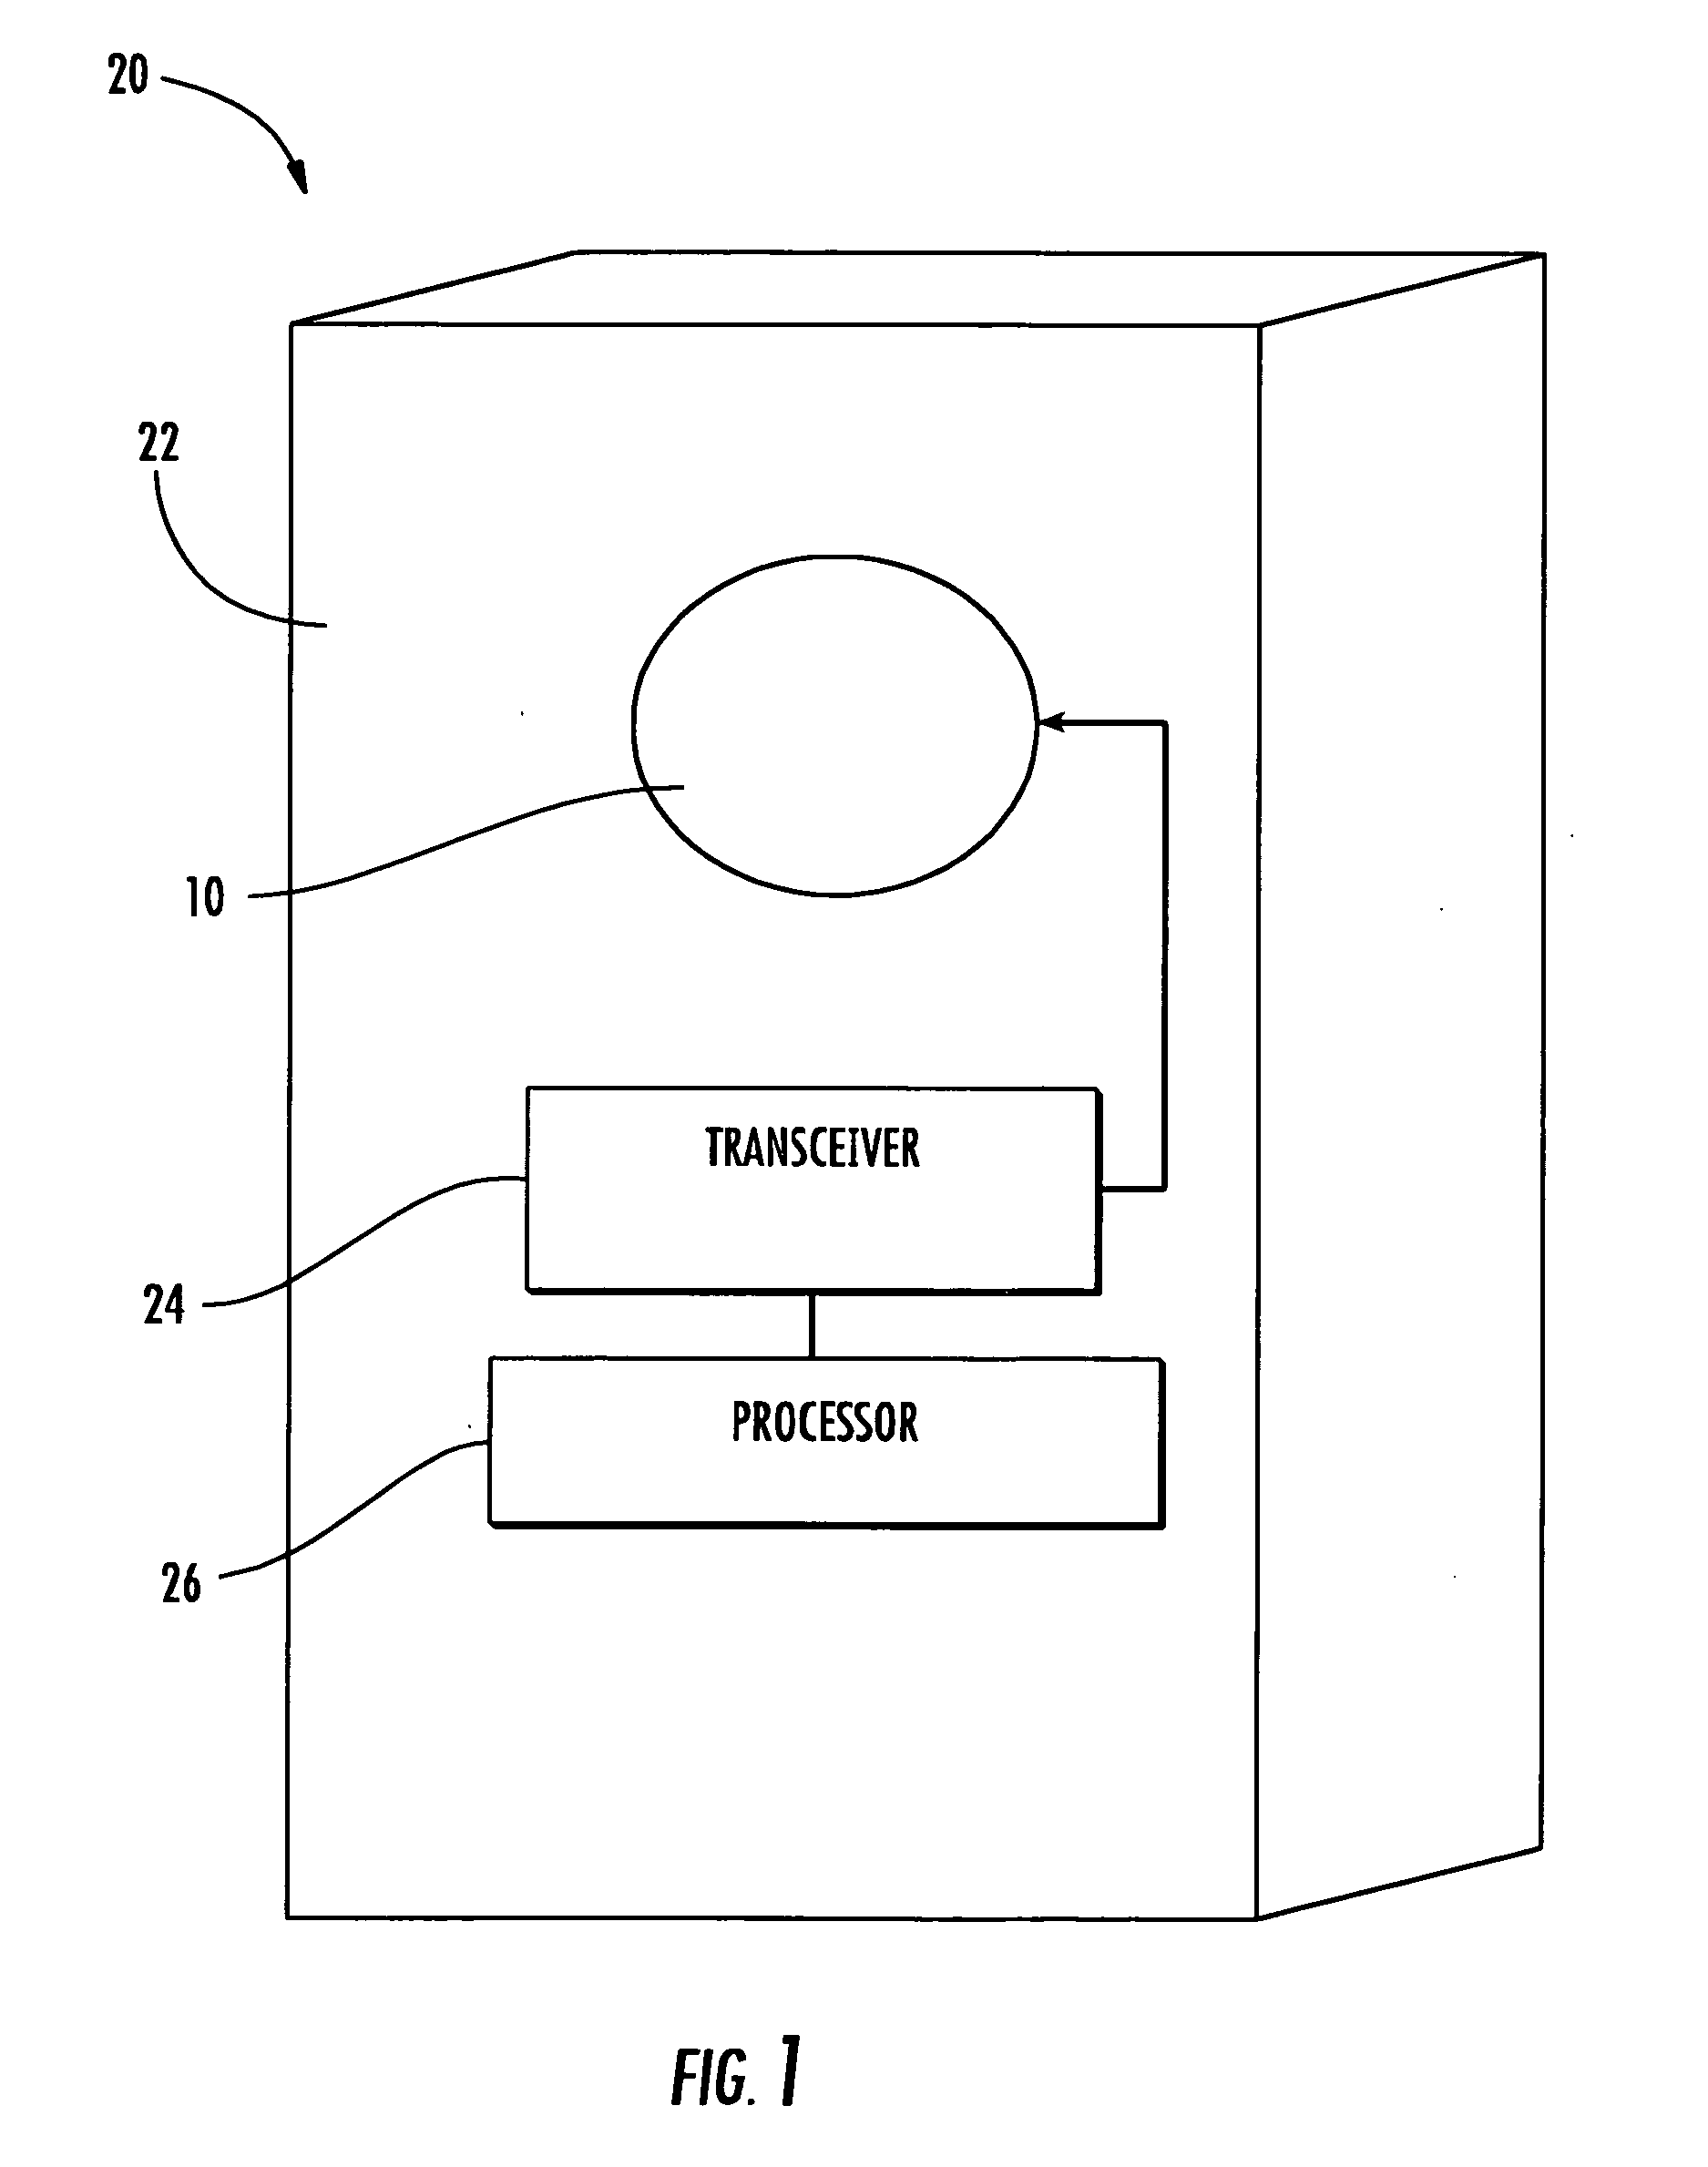 Broadband polarized antenna including magnetodielectric material, isoimpedance loading, and associated methods